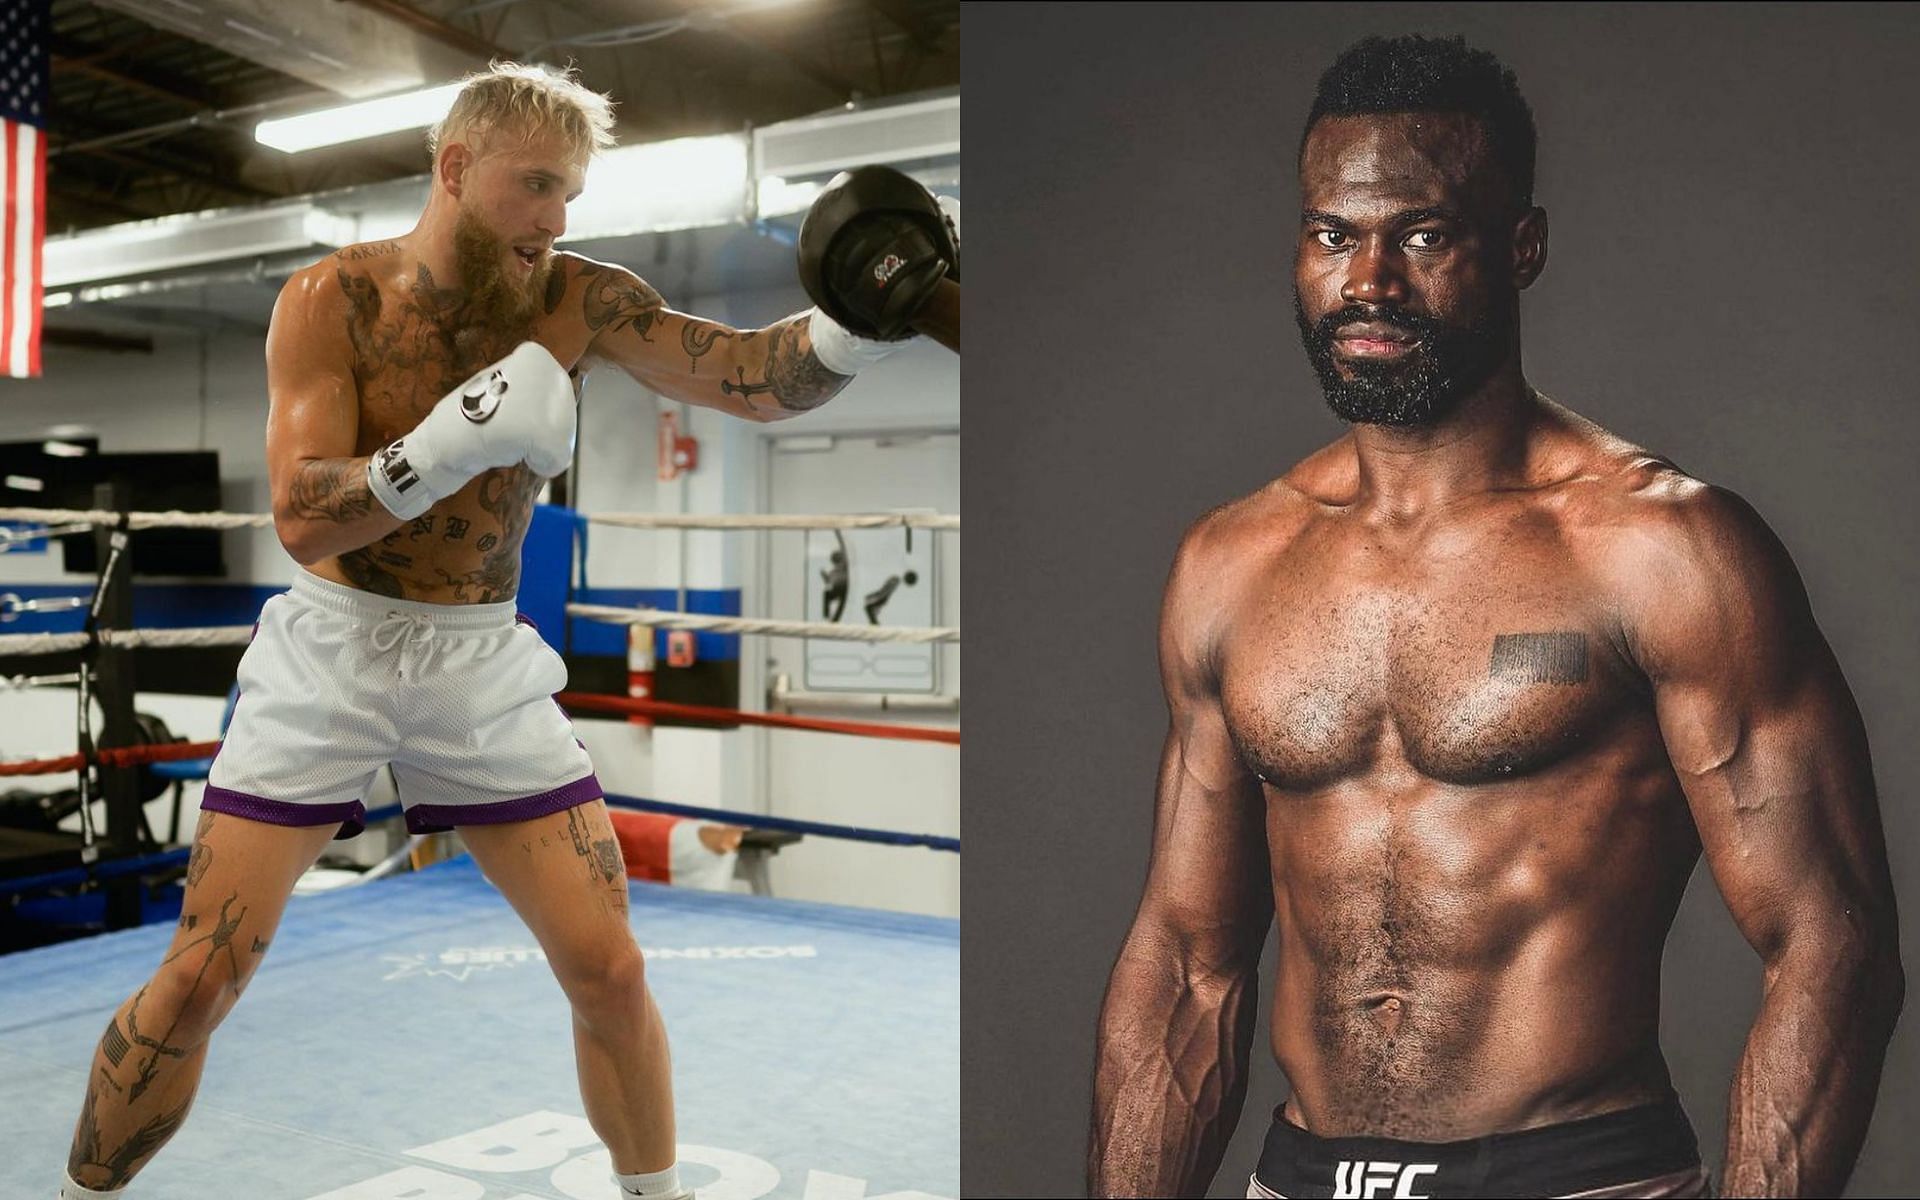 Jake Paul (Left) and Uriah Hall (Right) [Images via: @uriahhall and @jakepaul on Instagram]